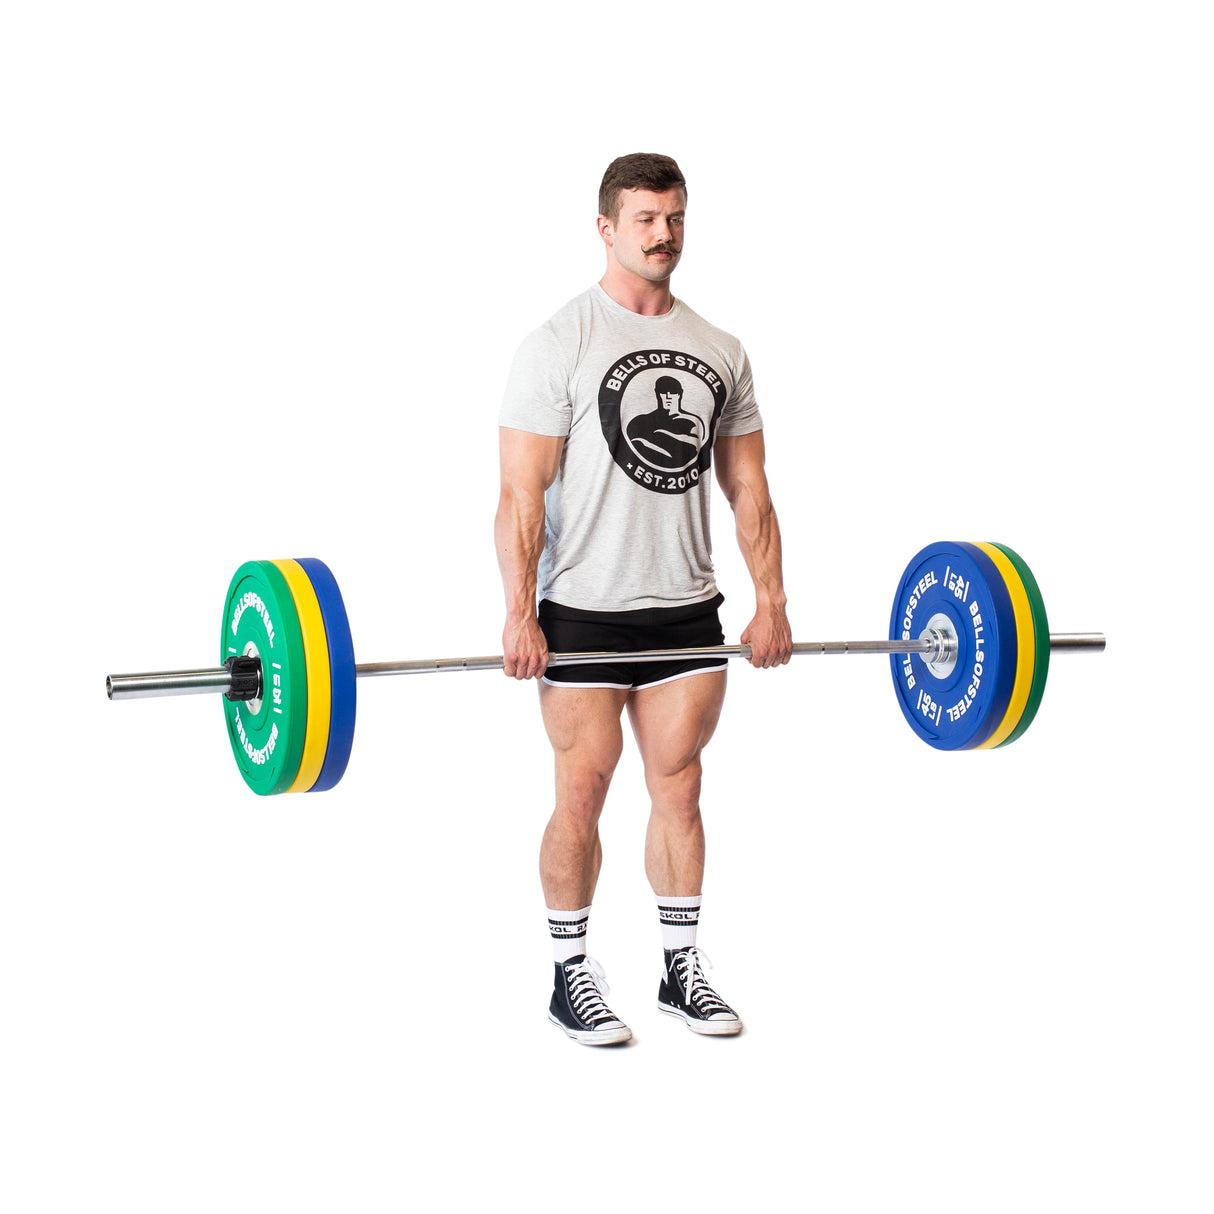 Male athlete doing deadlifts with Urethane Bumper Plates